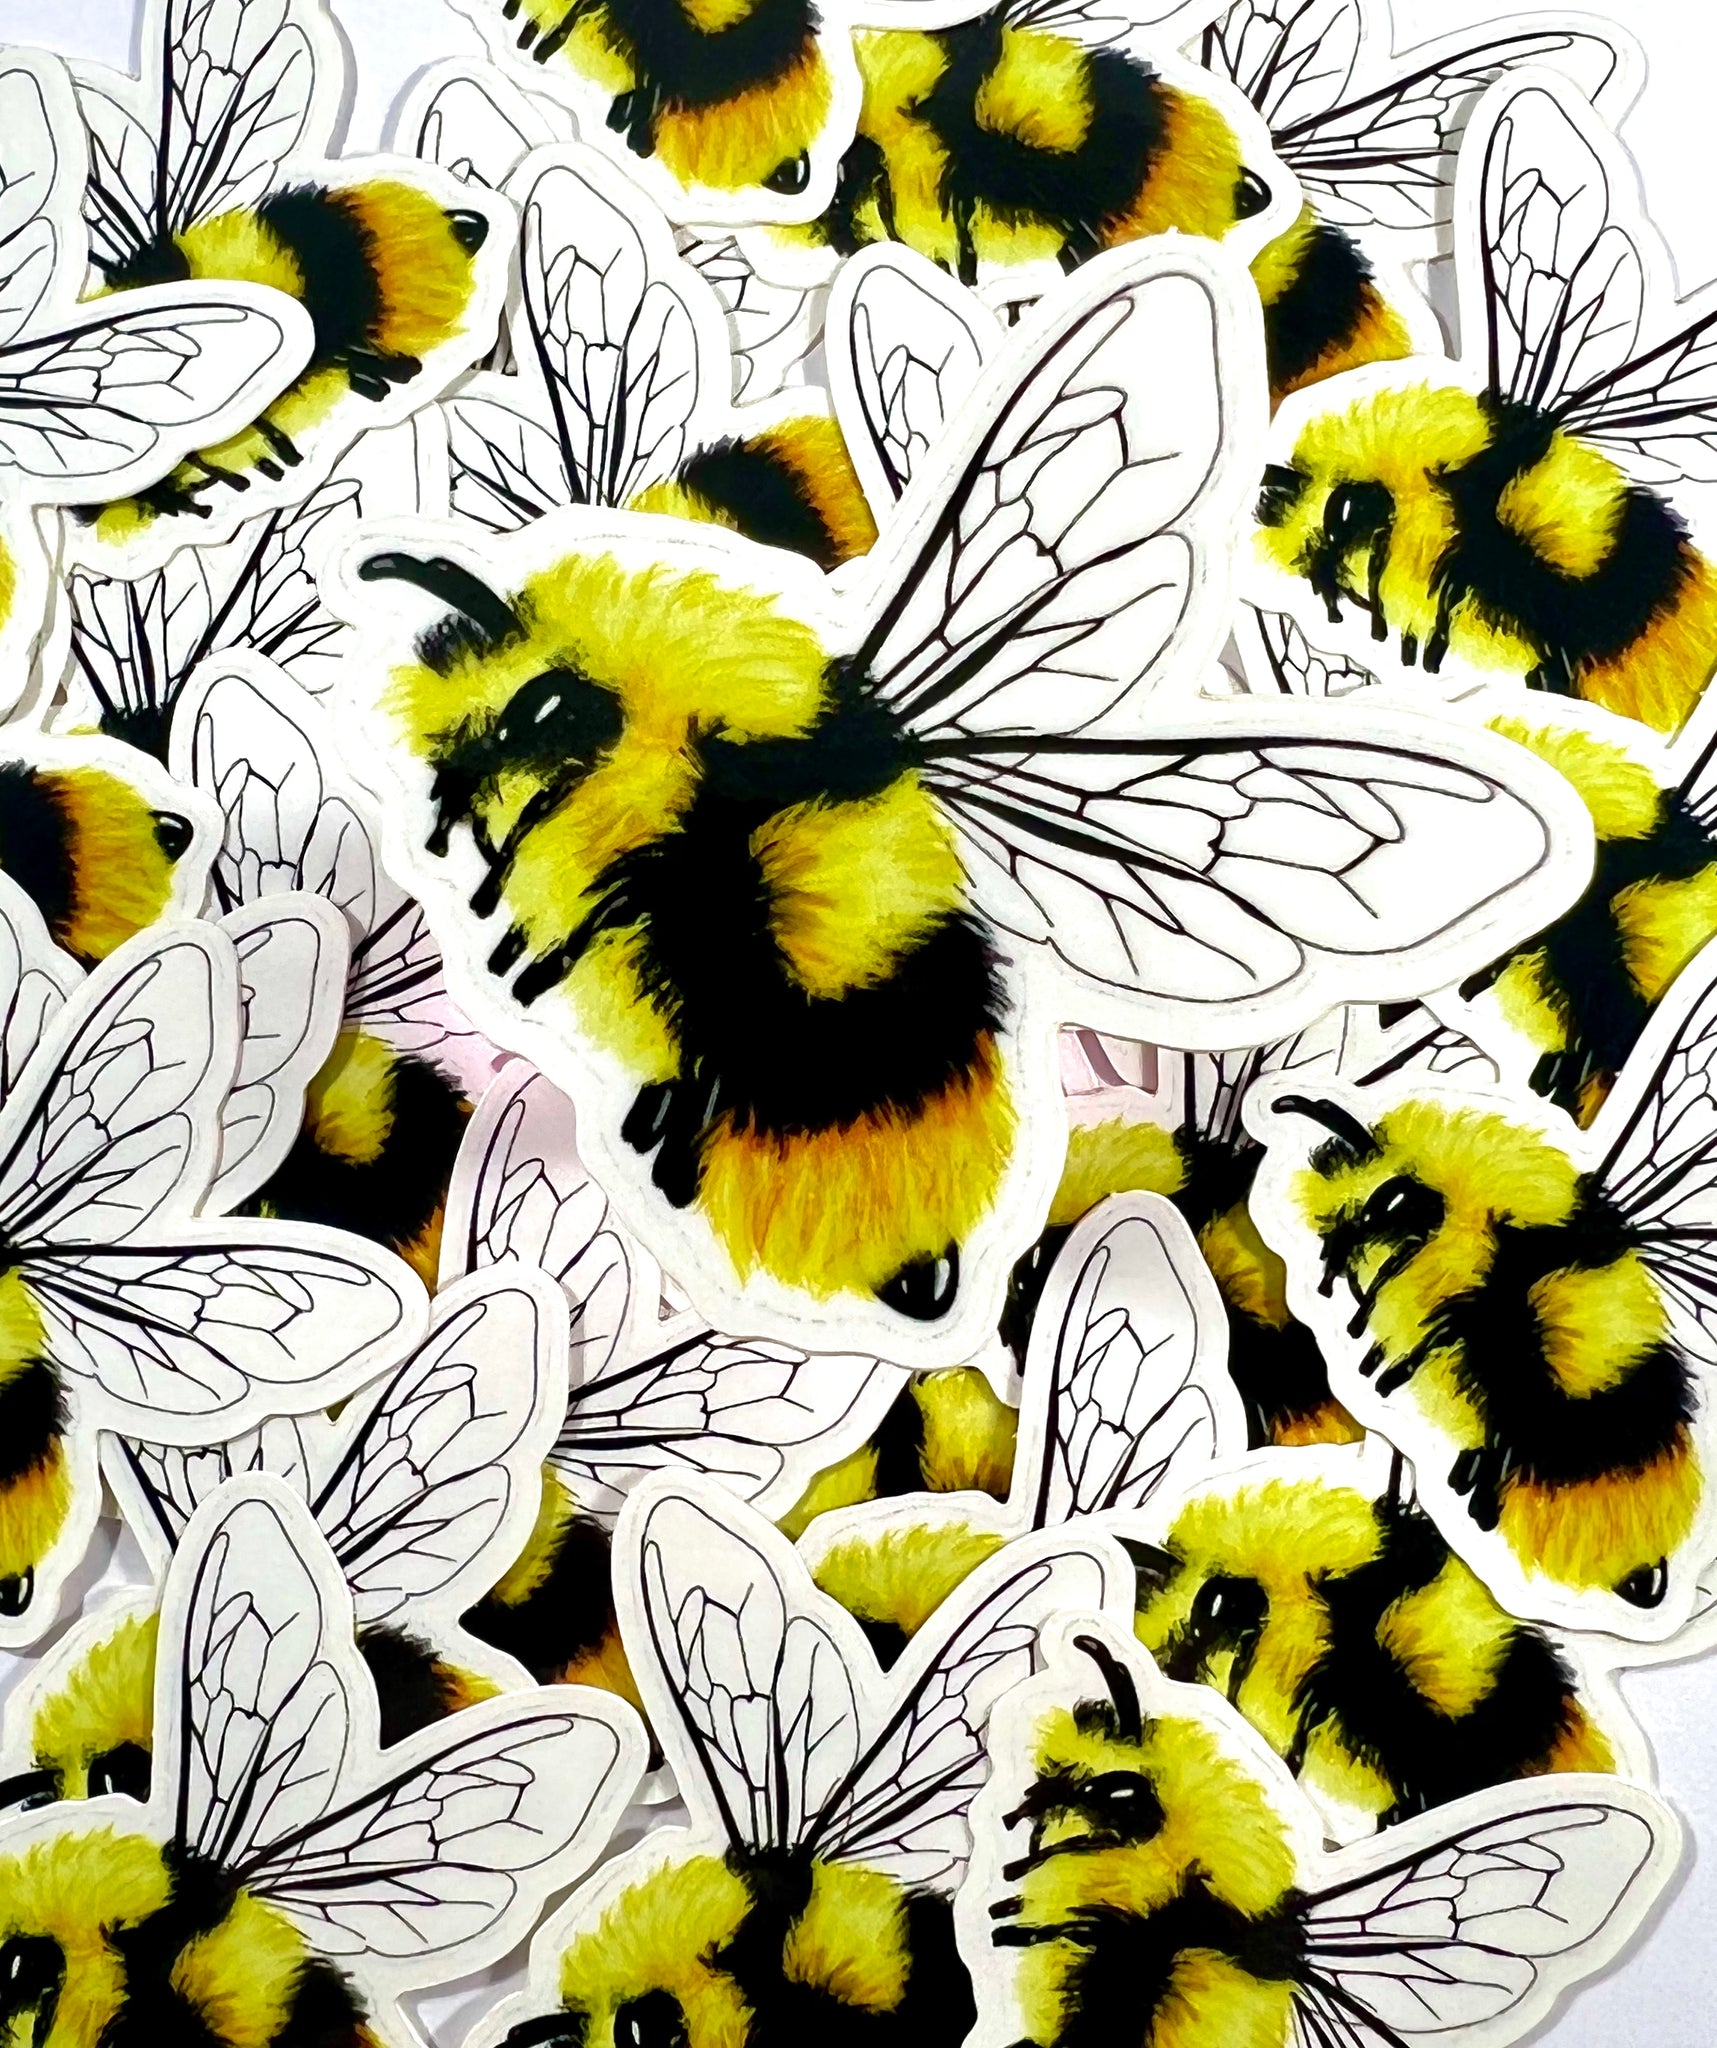 Fuzzy Bee sticker (sticker itself is not actually fuzzy ITS JUST A NAME)